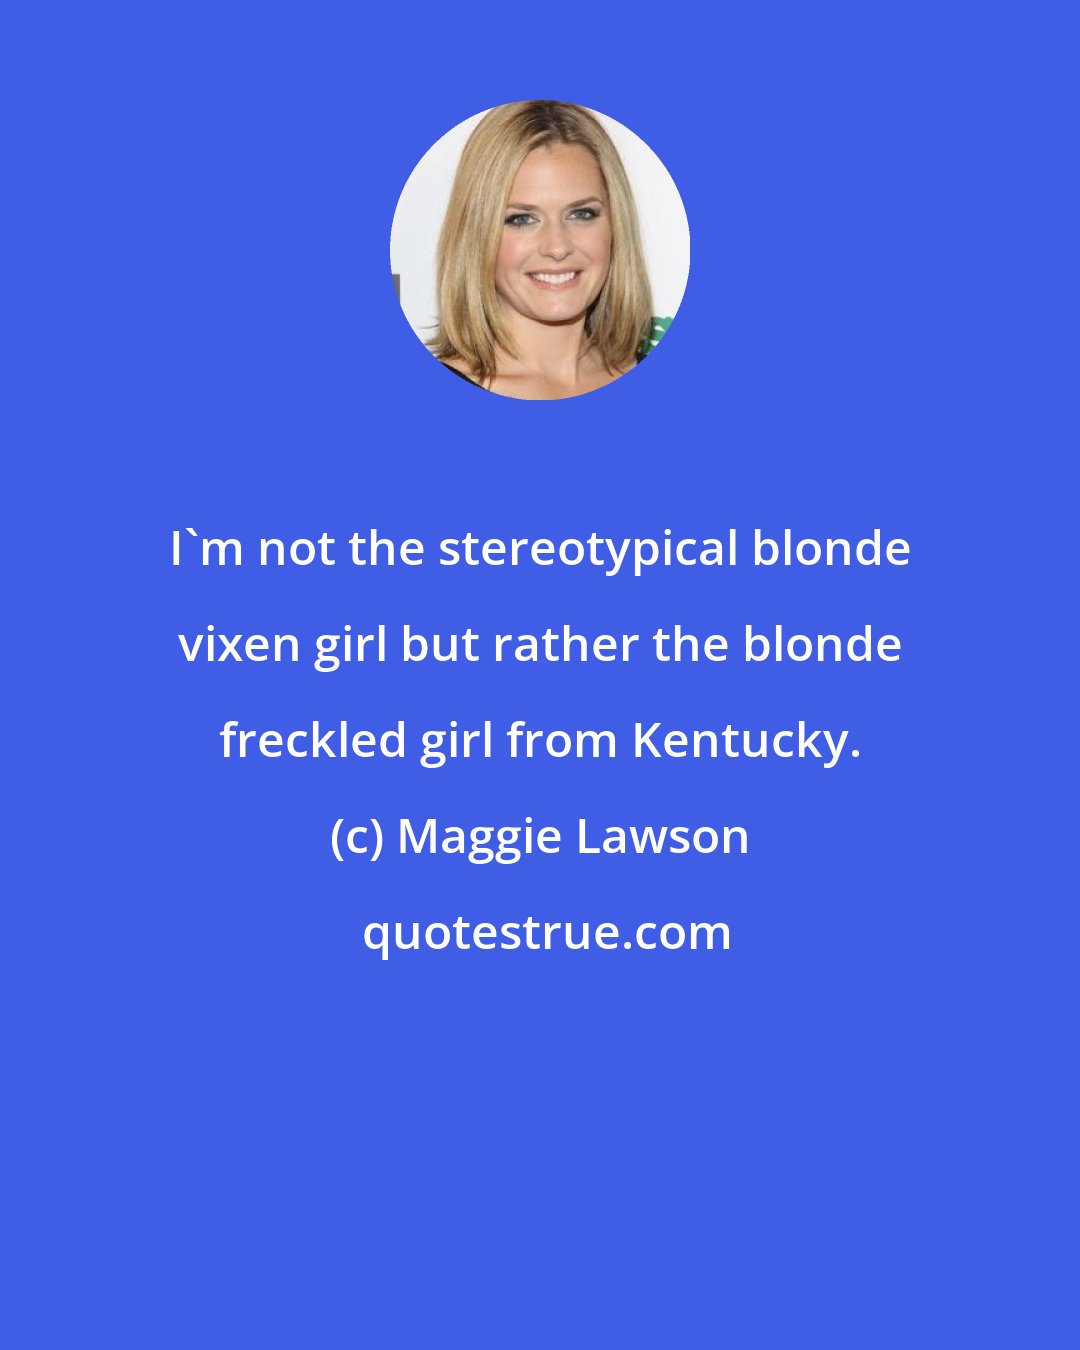 Maggie Lawson: I'm not the stereotypical blonde vixen girl but rather the blonde freckled girl from Kentucky.